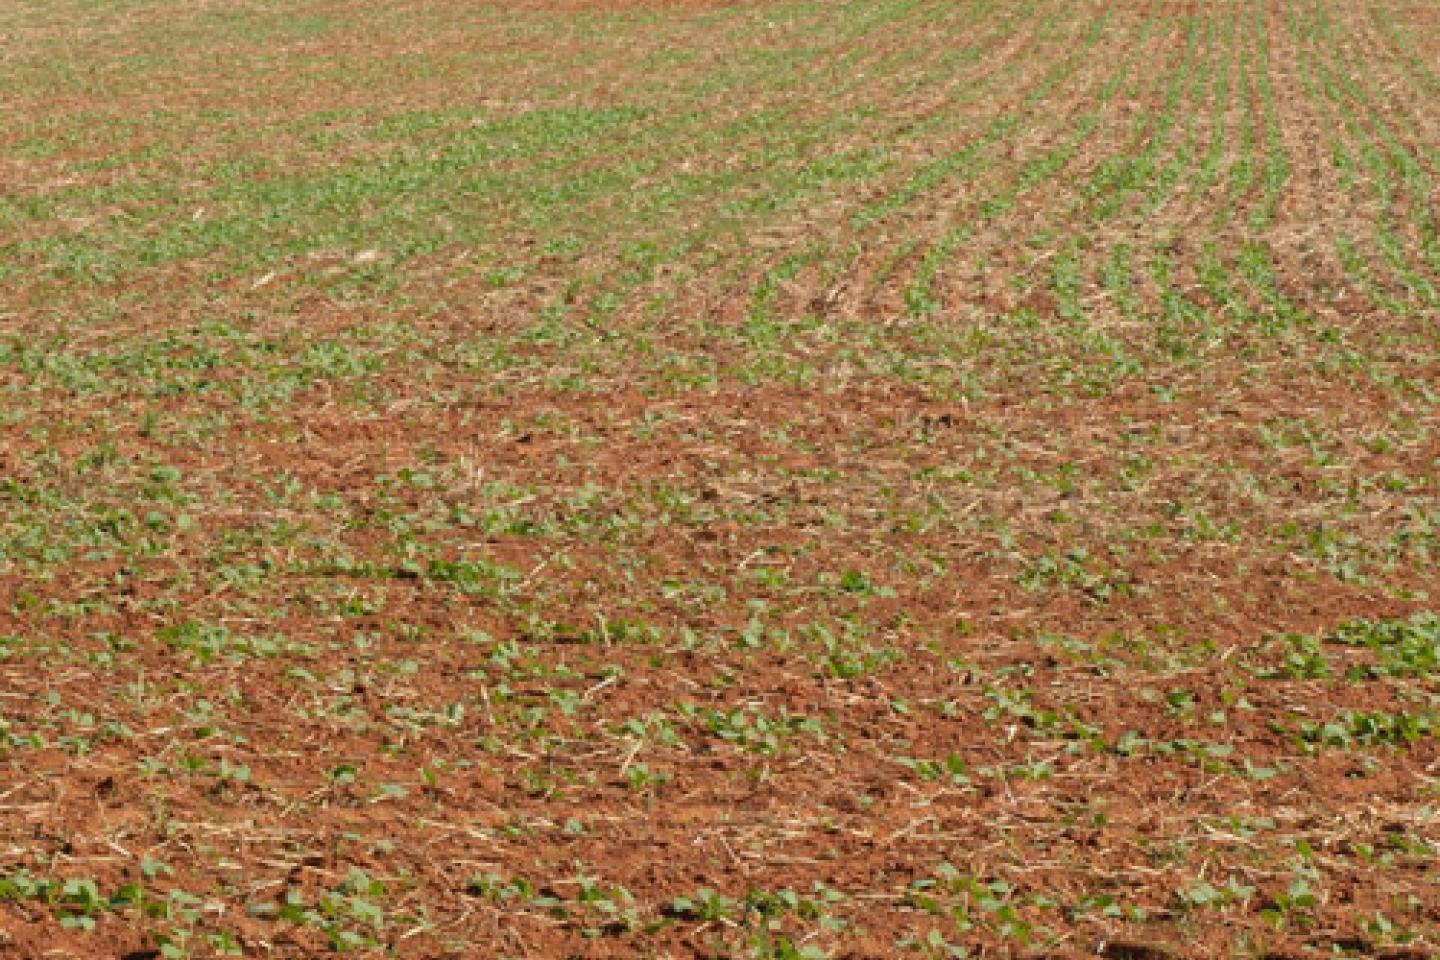 Field with Sprouting Crops